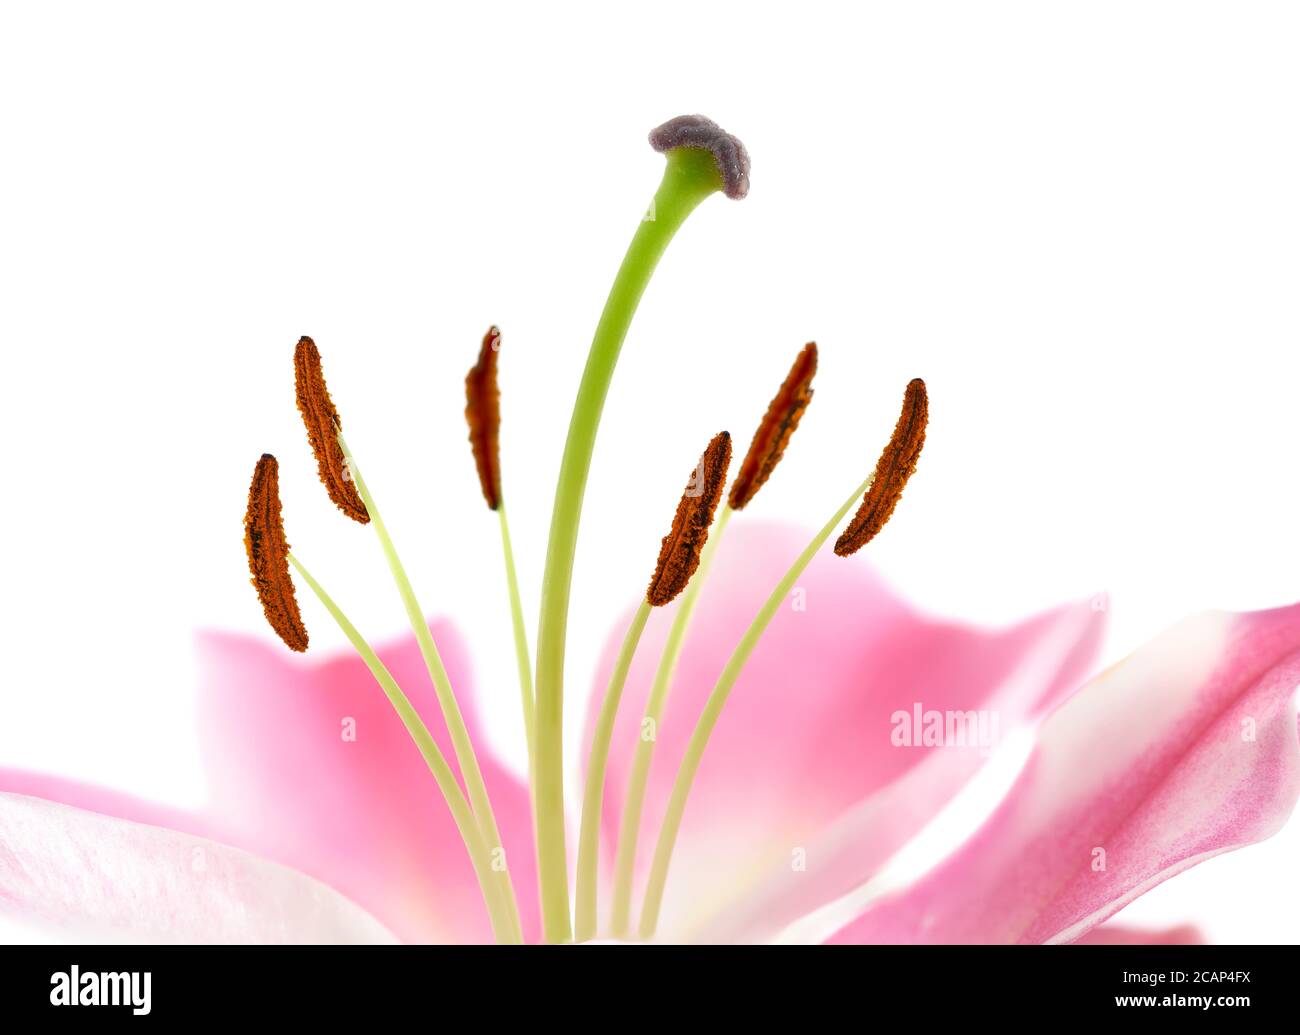 Stargazer lilies photographed against a plain white background Stock Photo